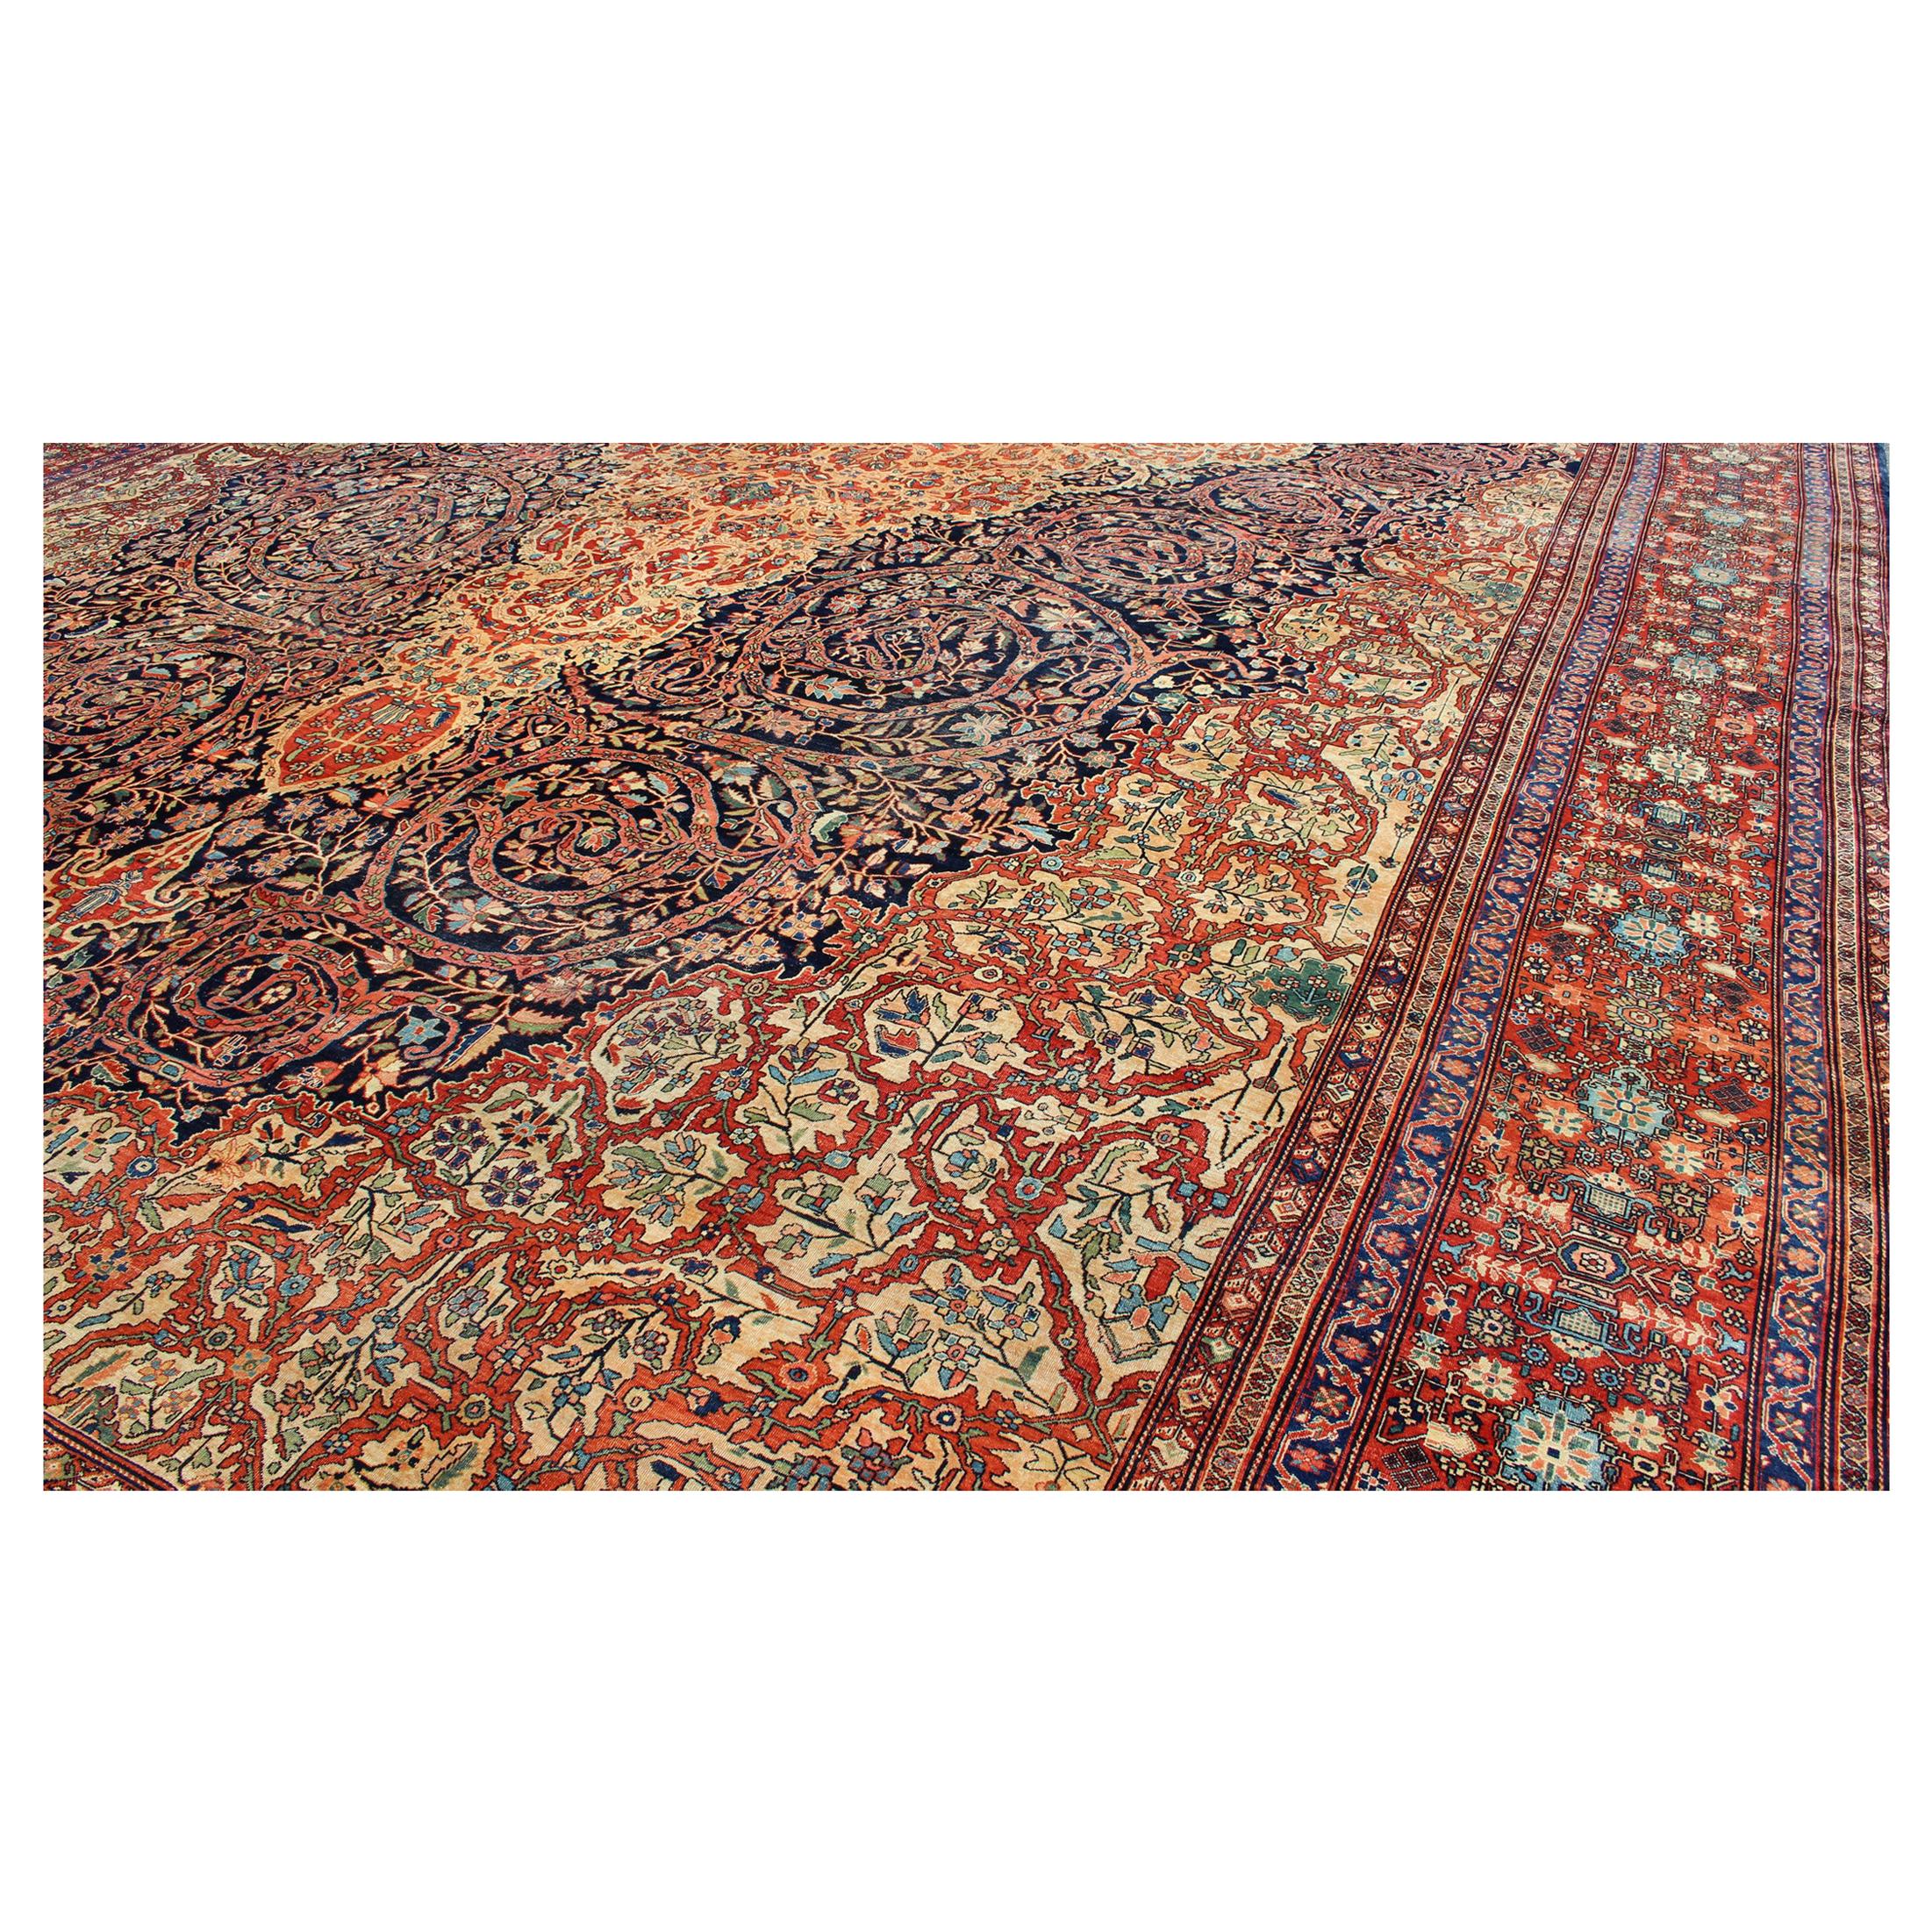 Palace-Sized  Extremely Finely Woven Antique Sarouk-Farahan Persian Rug 